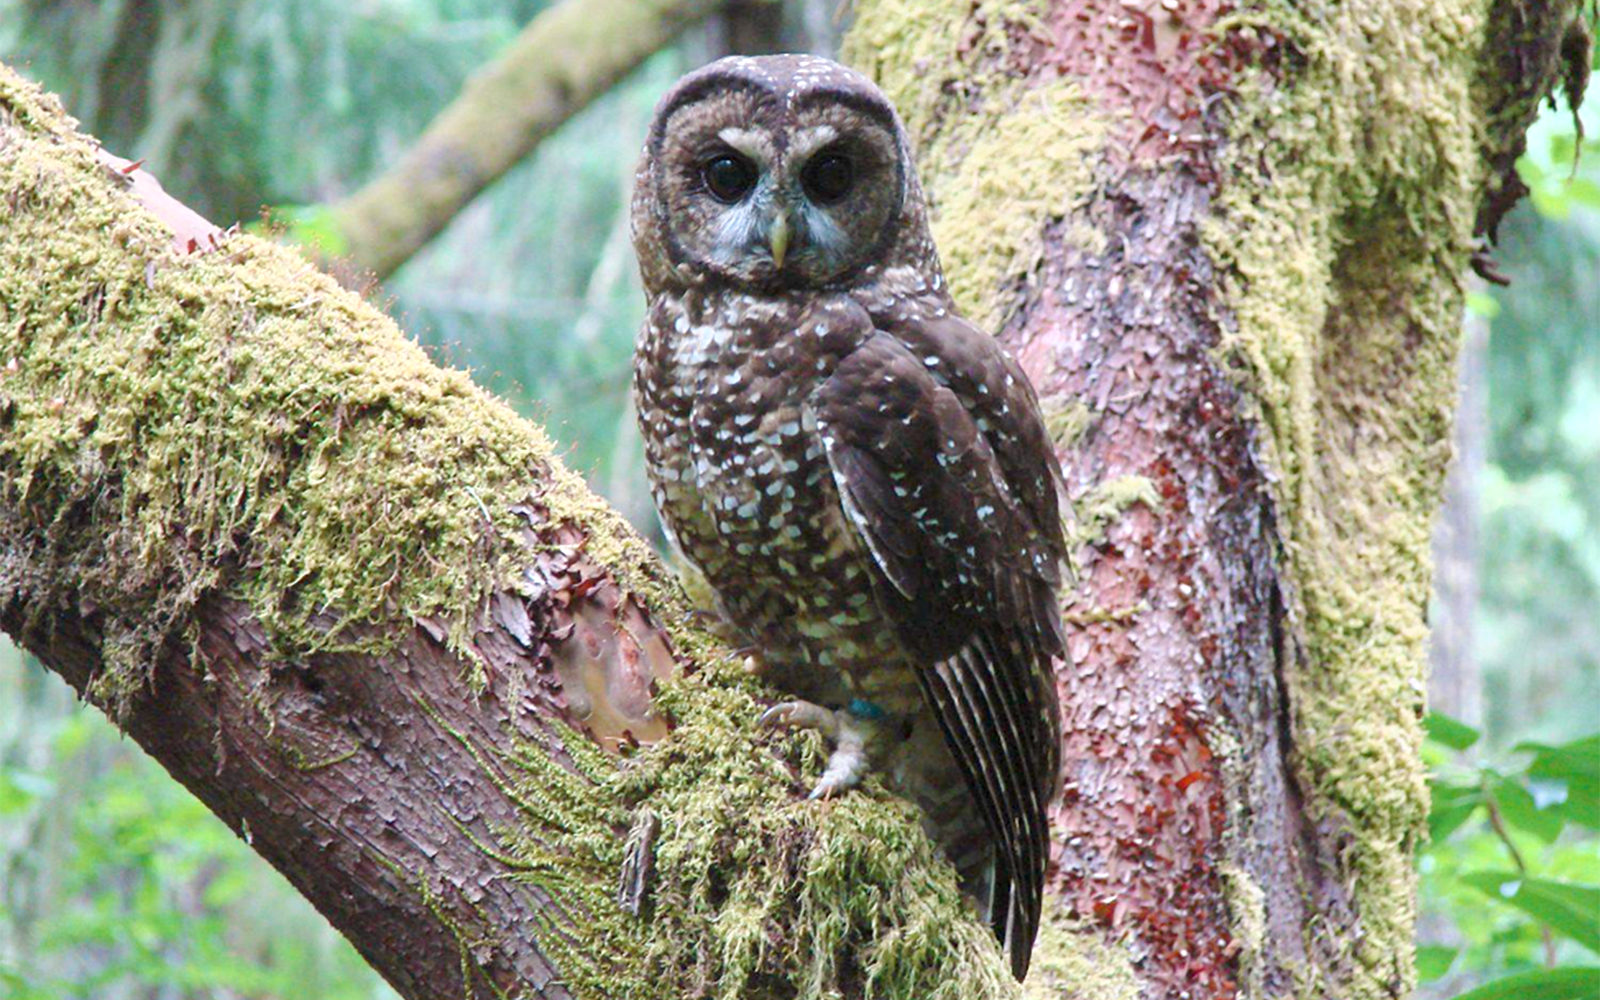 USFWS: Northern spotted owls are endangered, but we’re too busy to help